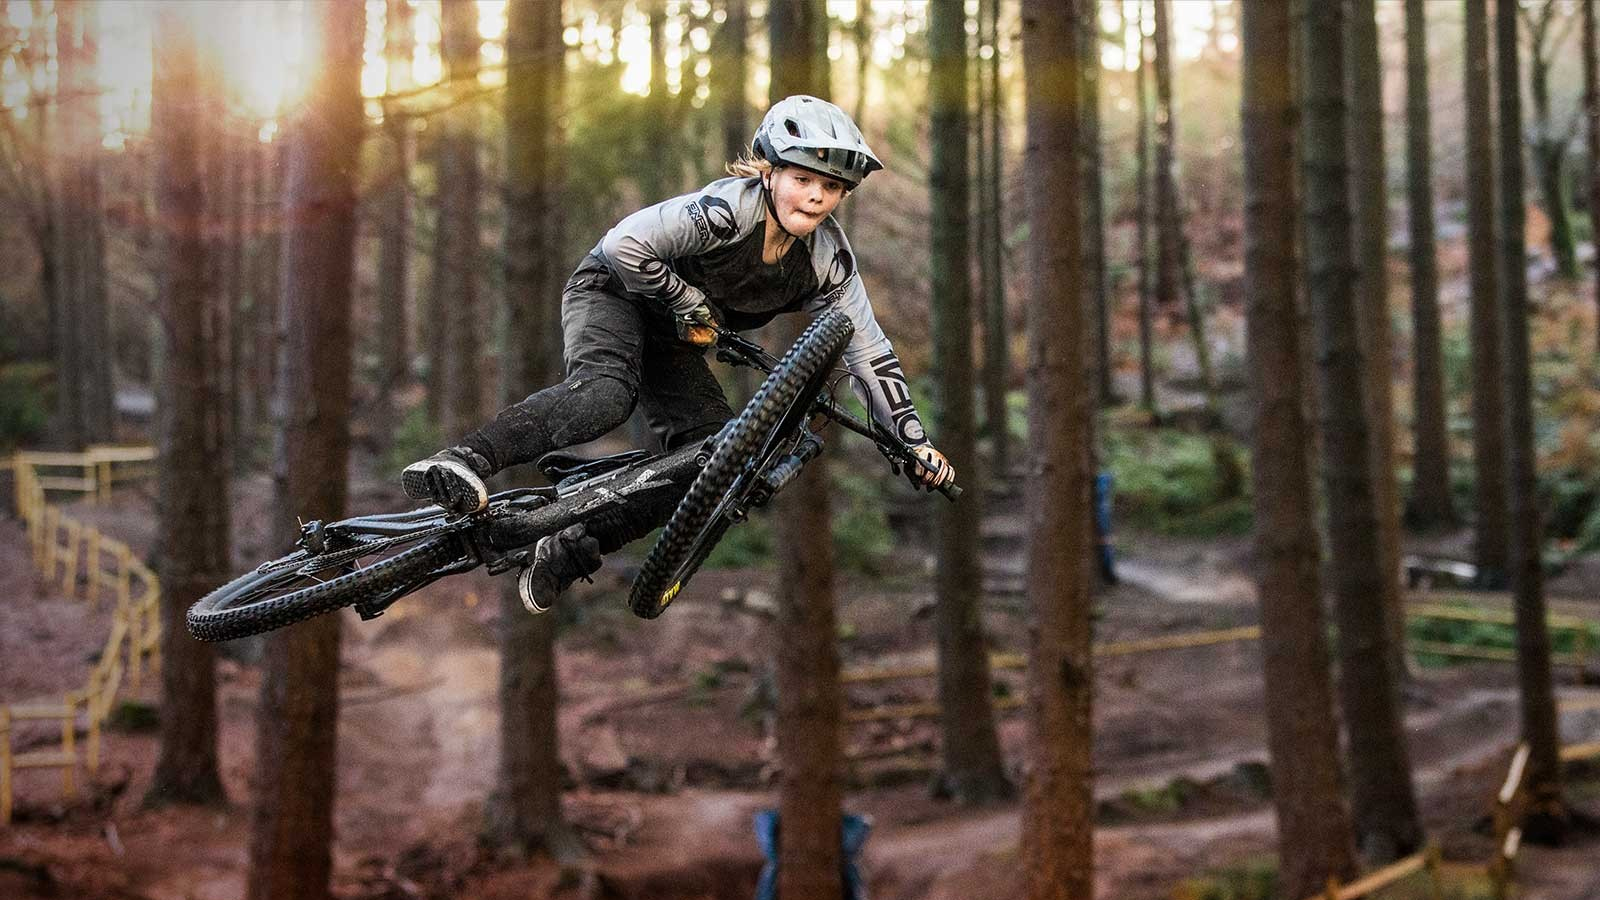 Harmonisch rijk Interactie Best 24-inch mountain bikes: Top bikes for young shredders looking to hit  the trails | BikePerfect